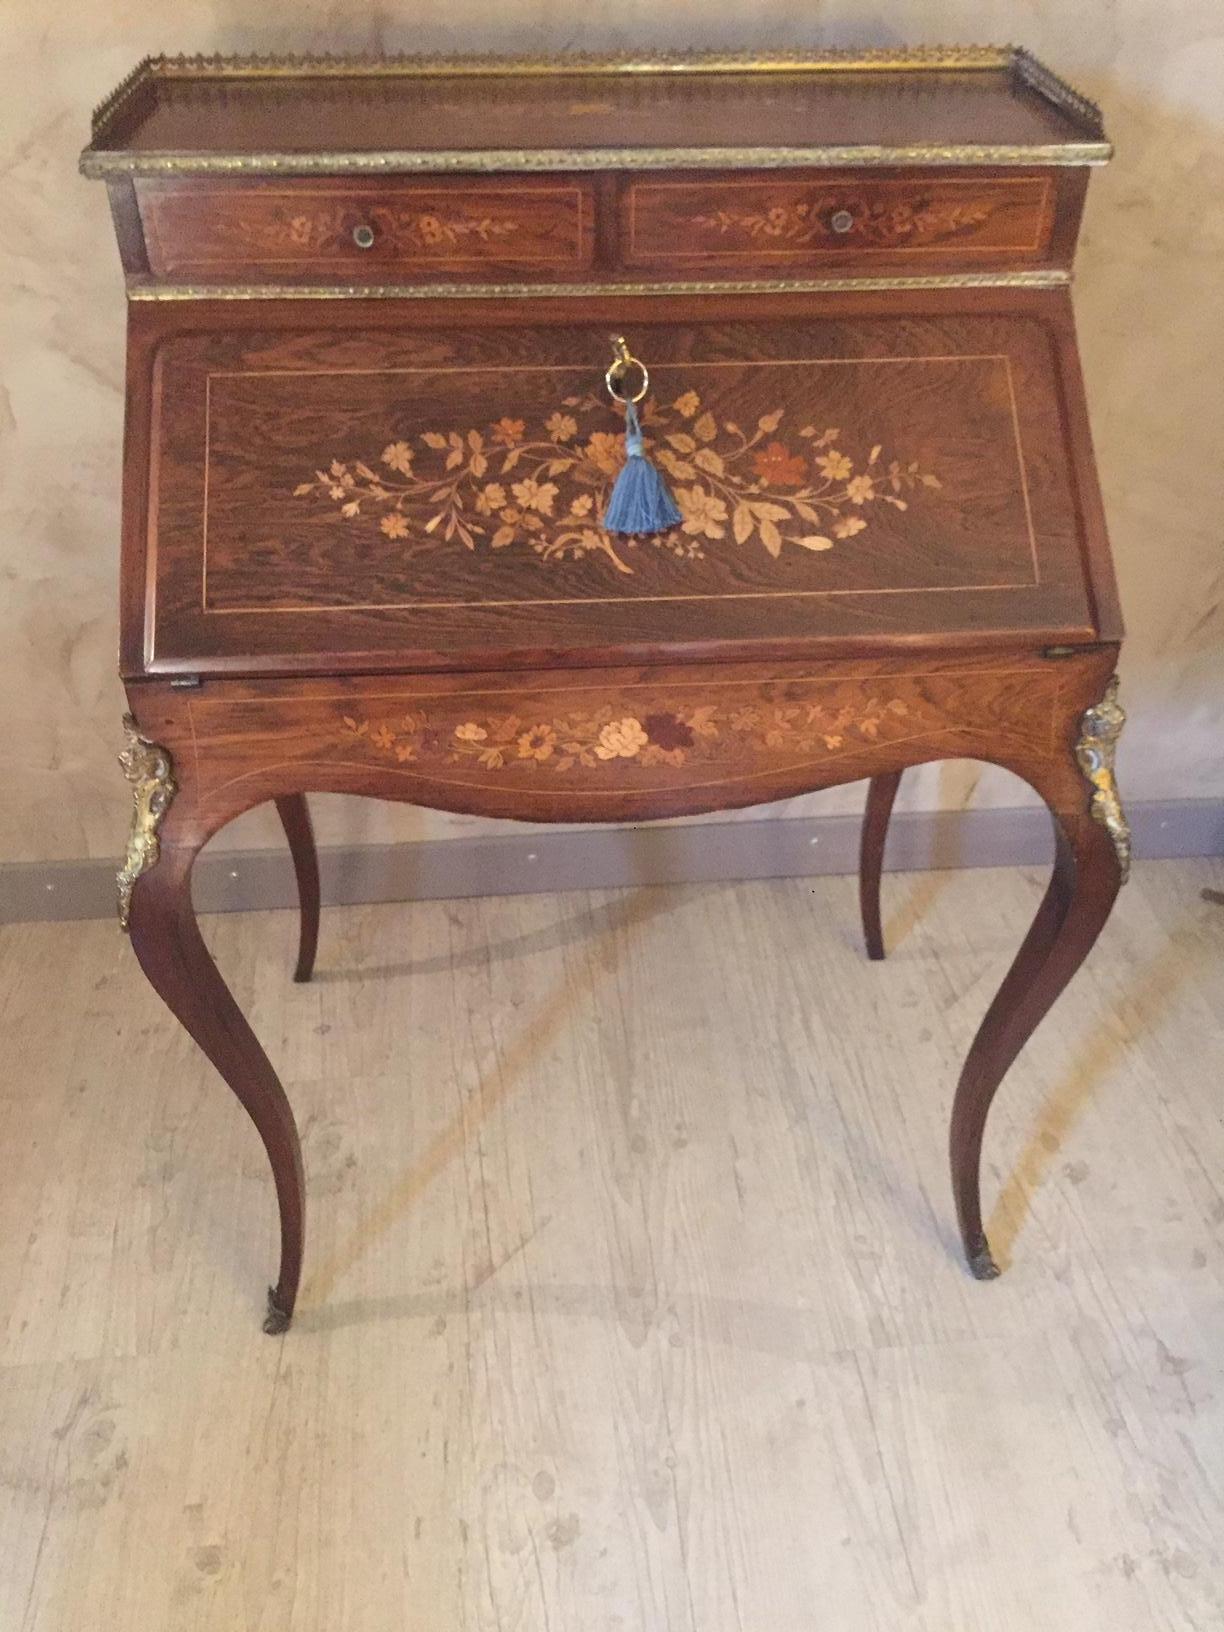 Very nice early 20th century French Louis XV style opening rosewood inlaid Secretaire.
Beautiful Flower marquetry. 
Original angel's head bronze. 
Bronze gallery. Original key. Two outside drawers. Inside, multiple drawers. 
The writing part